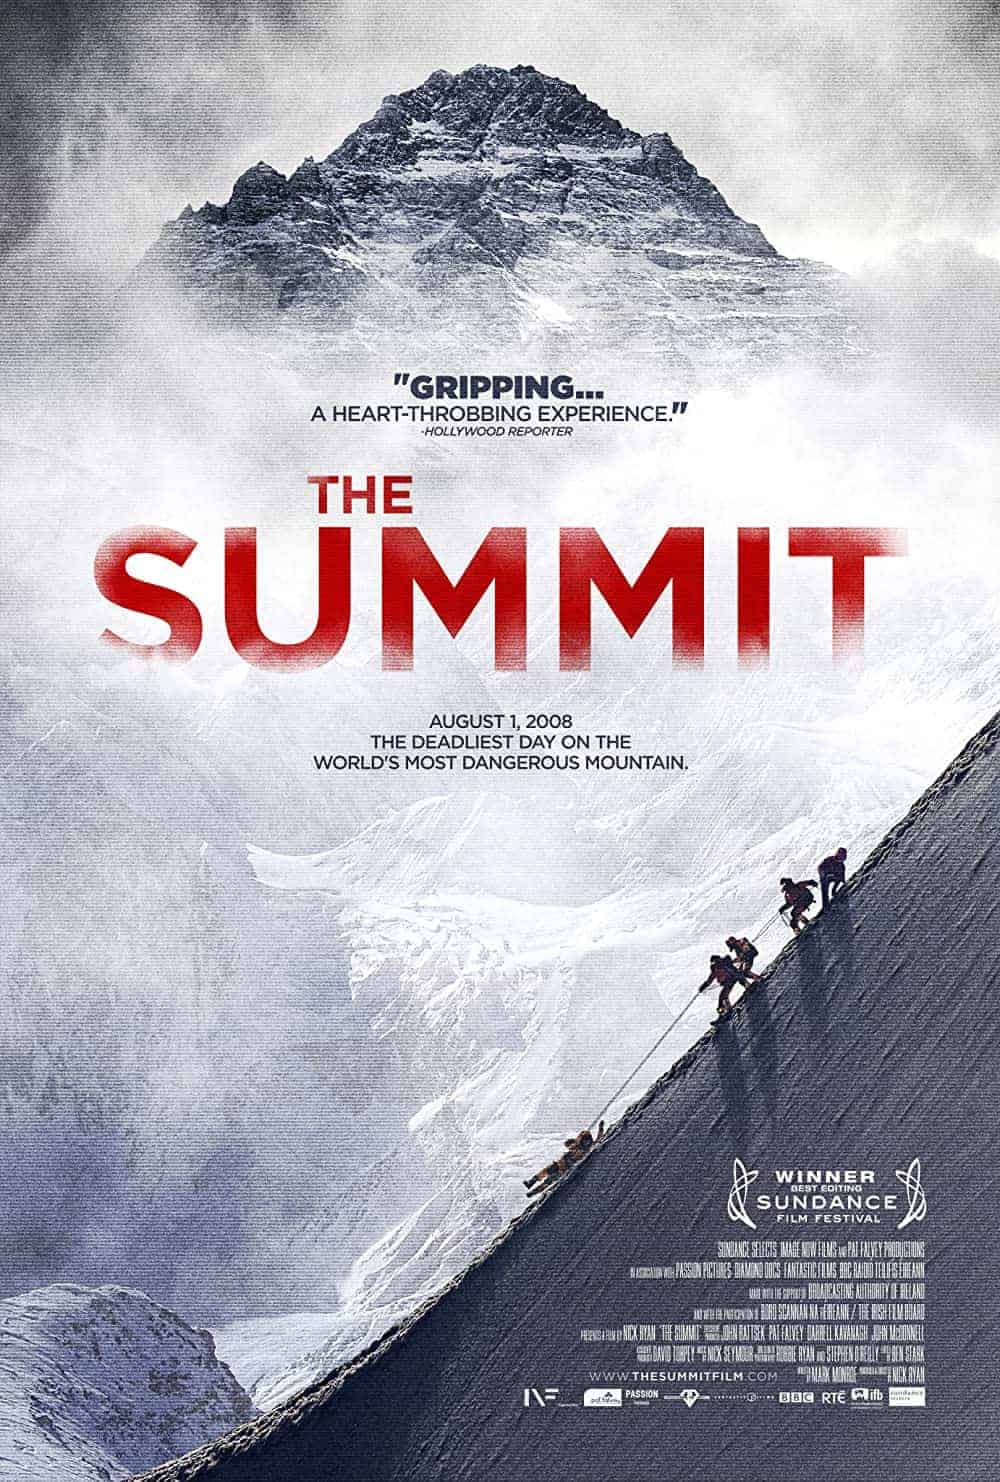 The Summit (2012) Best Mountaineering Movies You Can't Miss